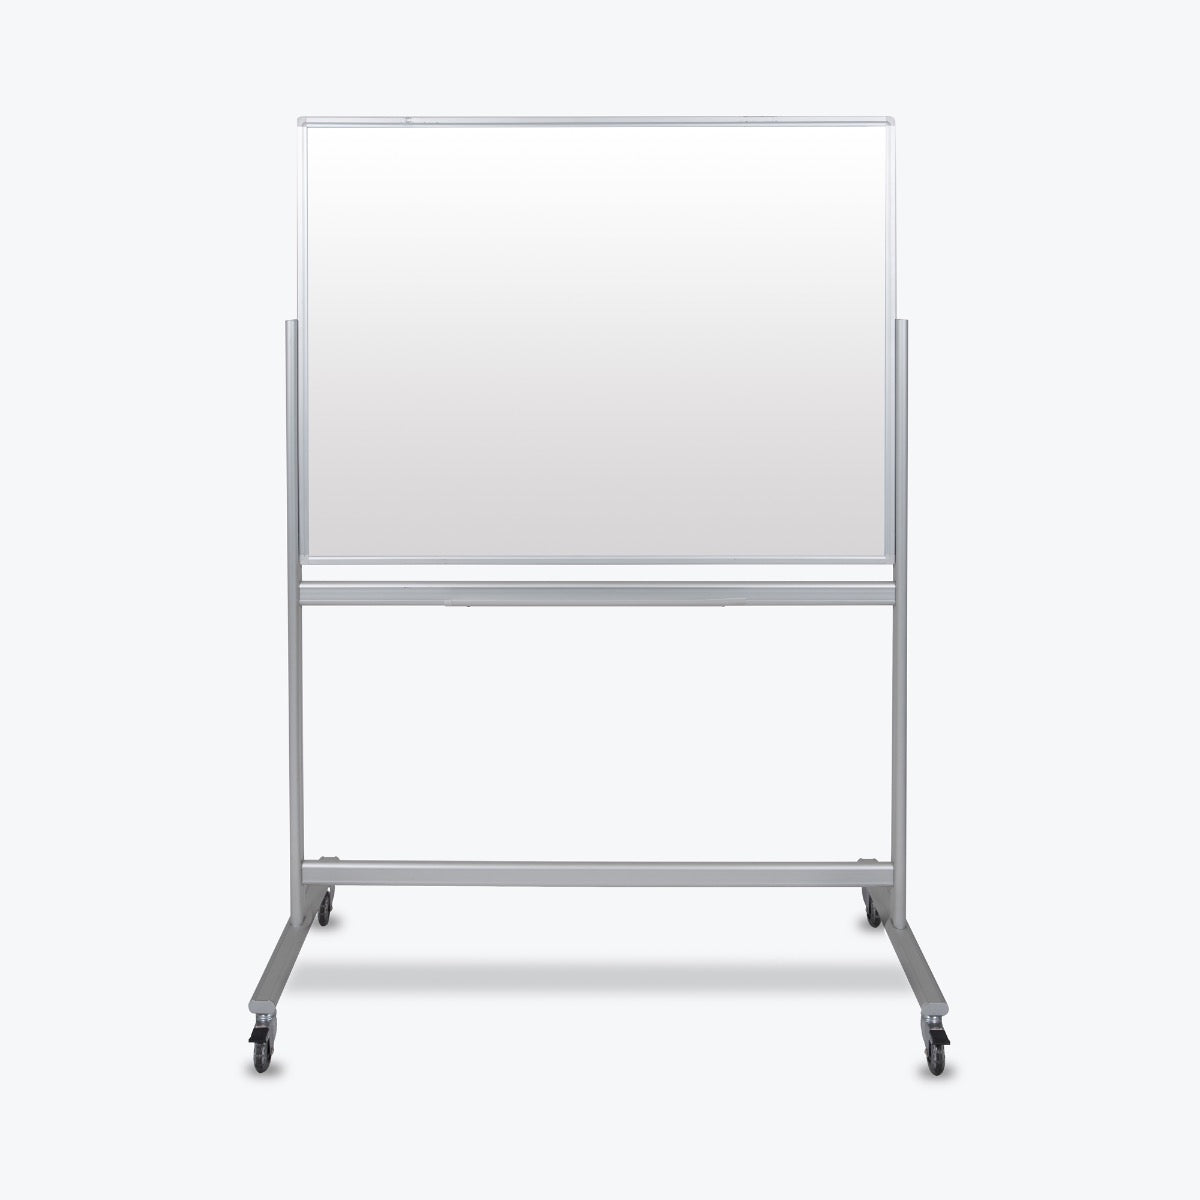 Whiteboards and Chalkboards